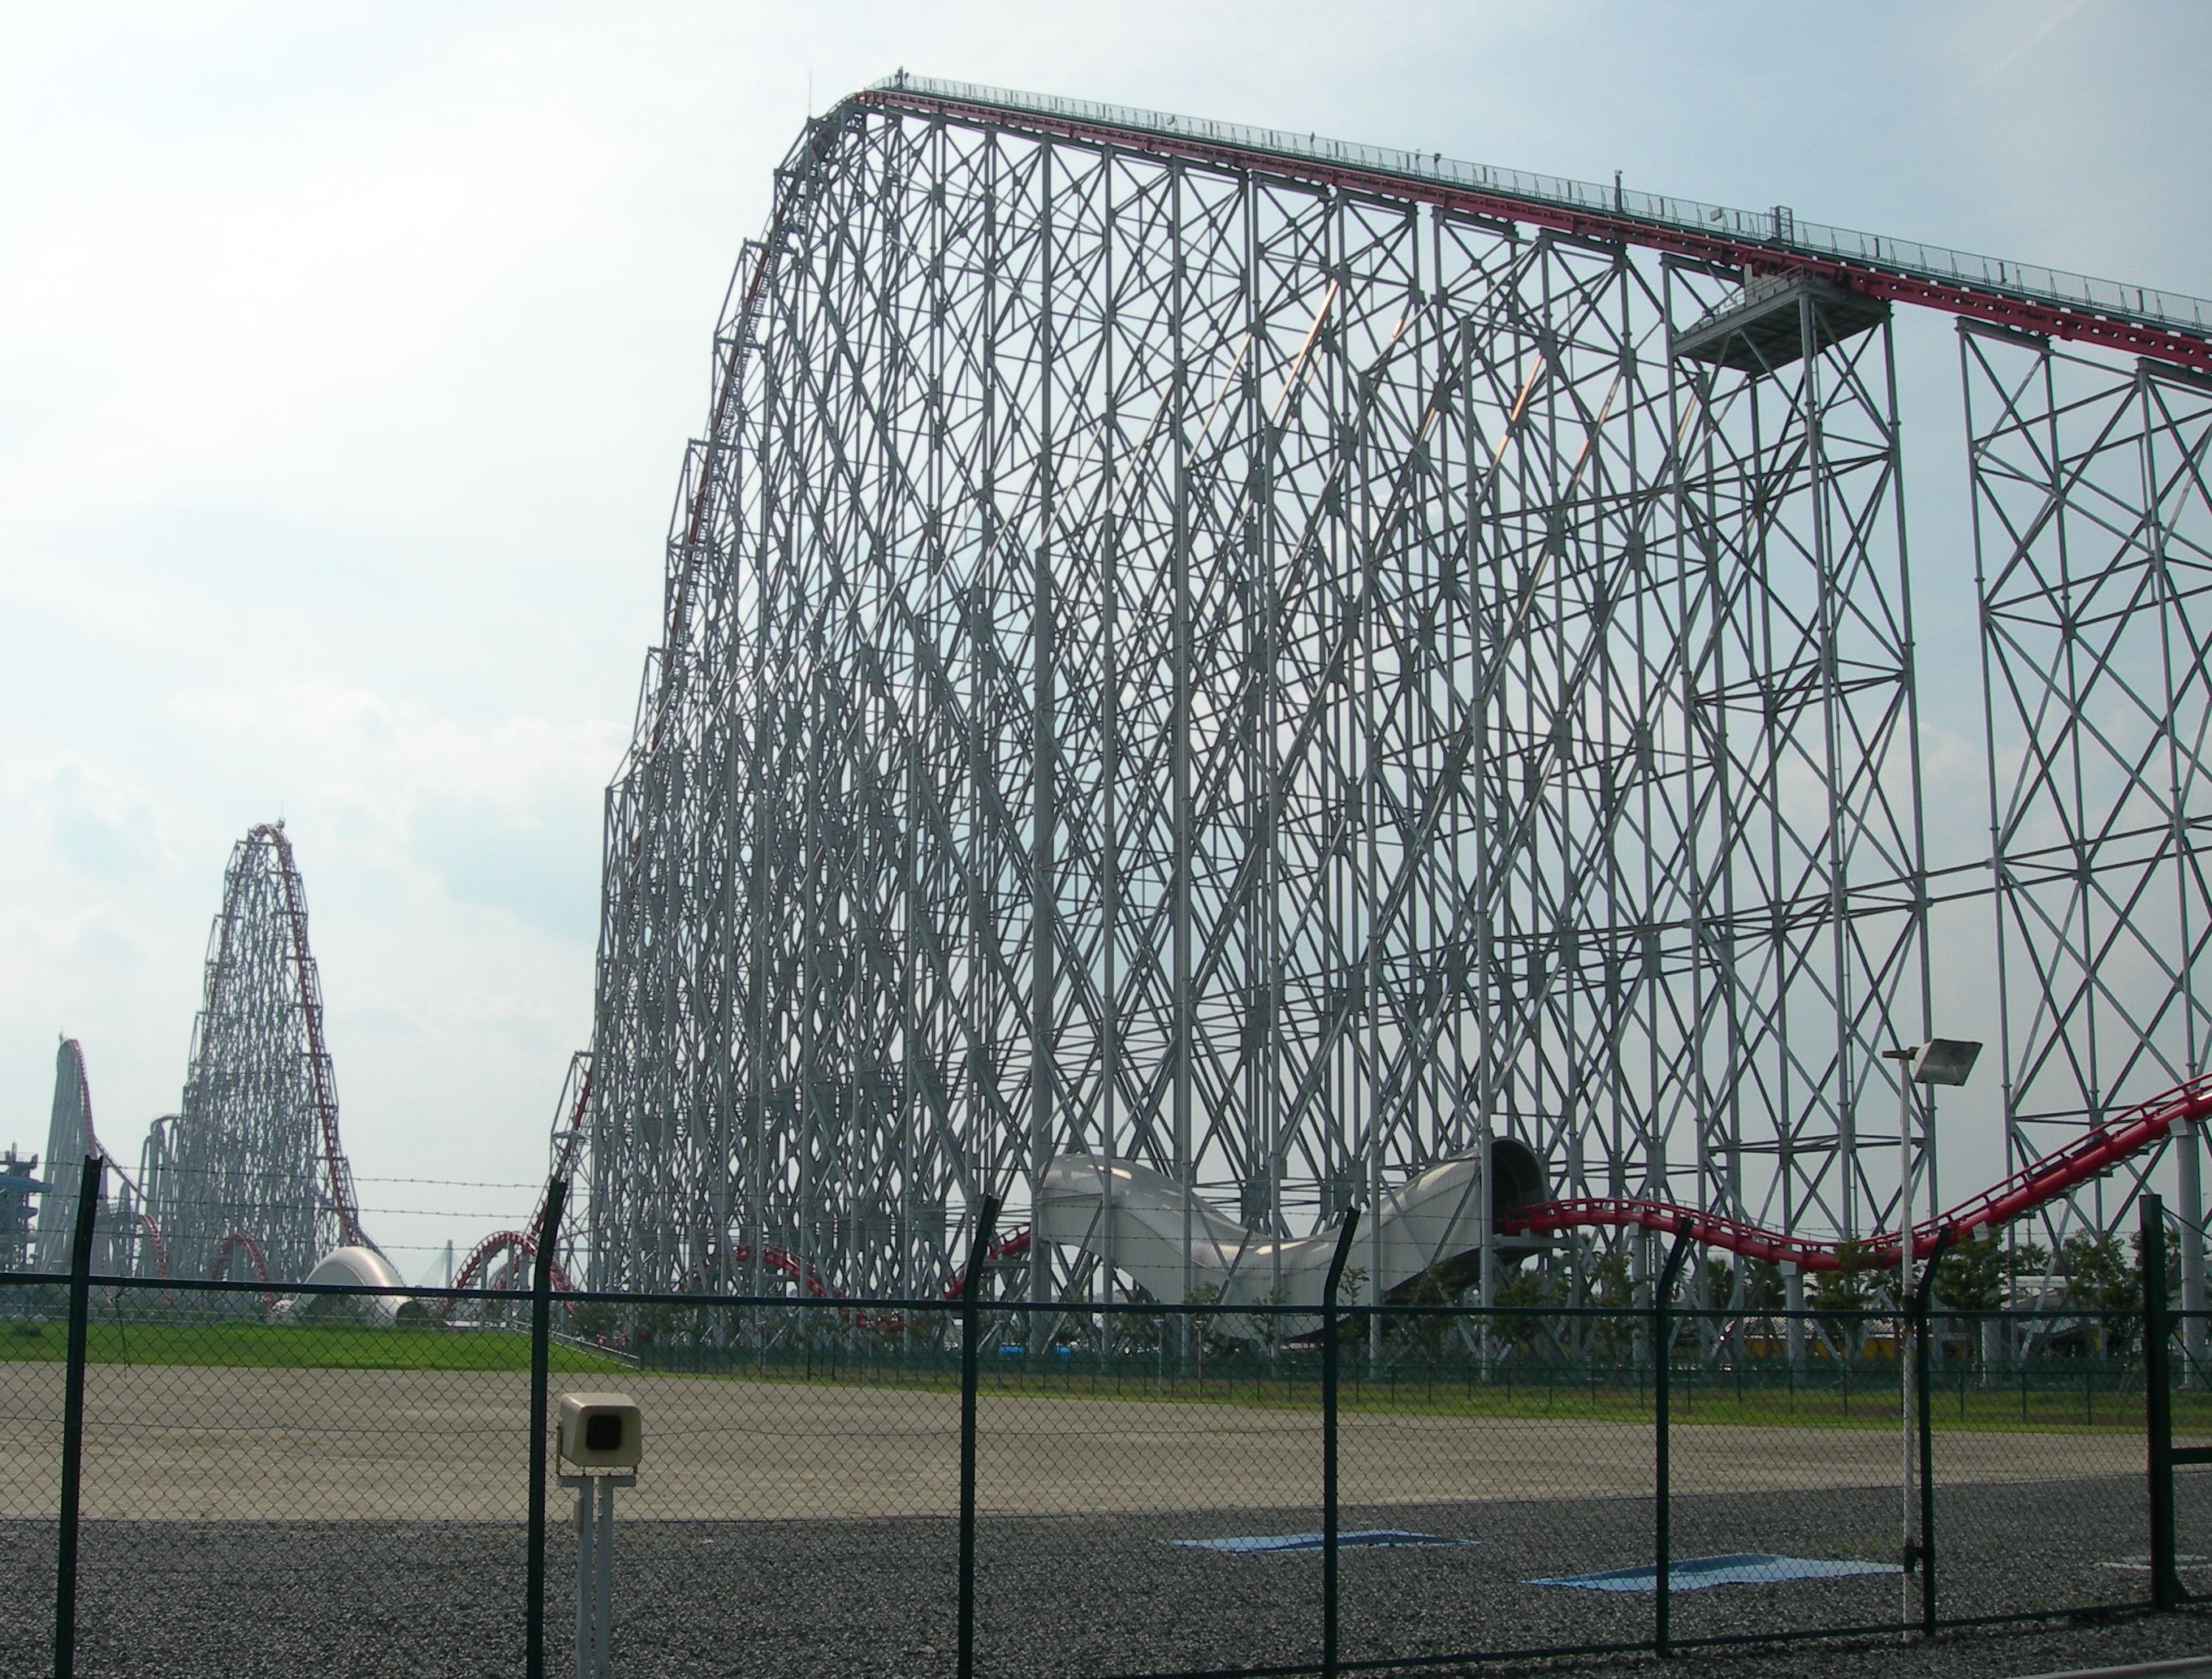 Japan's Steel Dragon Was The Most Expensive Roller Coaster In The World To Construct. Why?